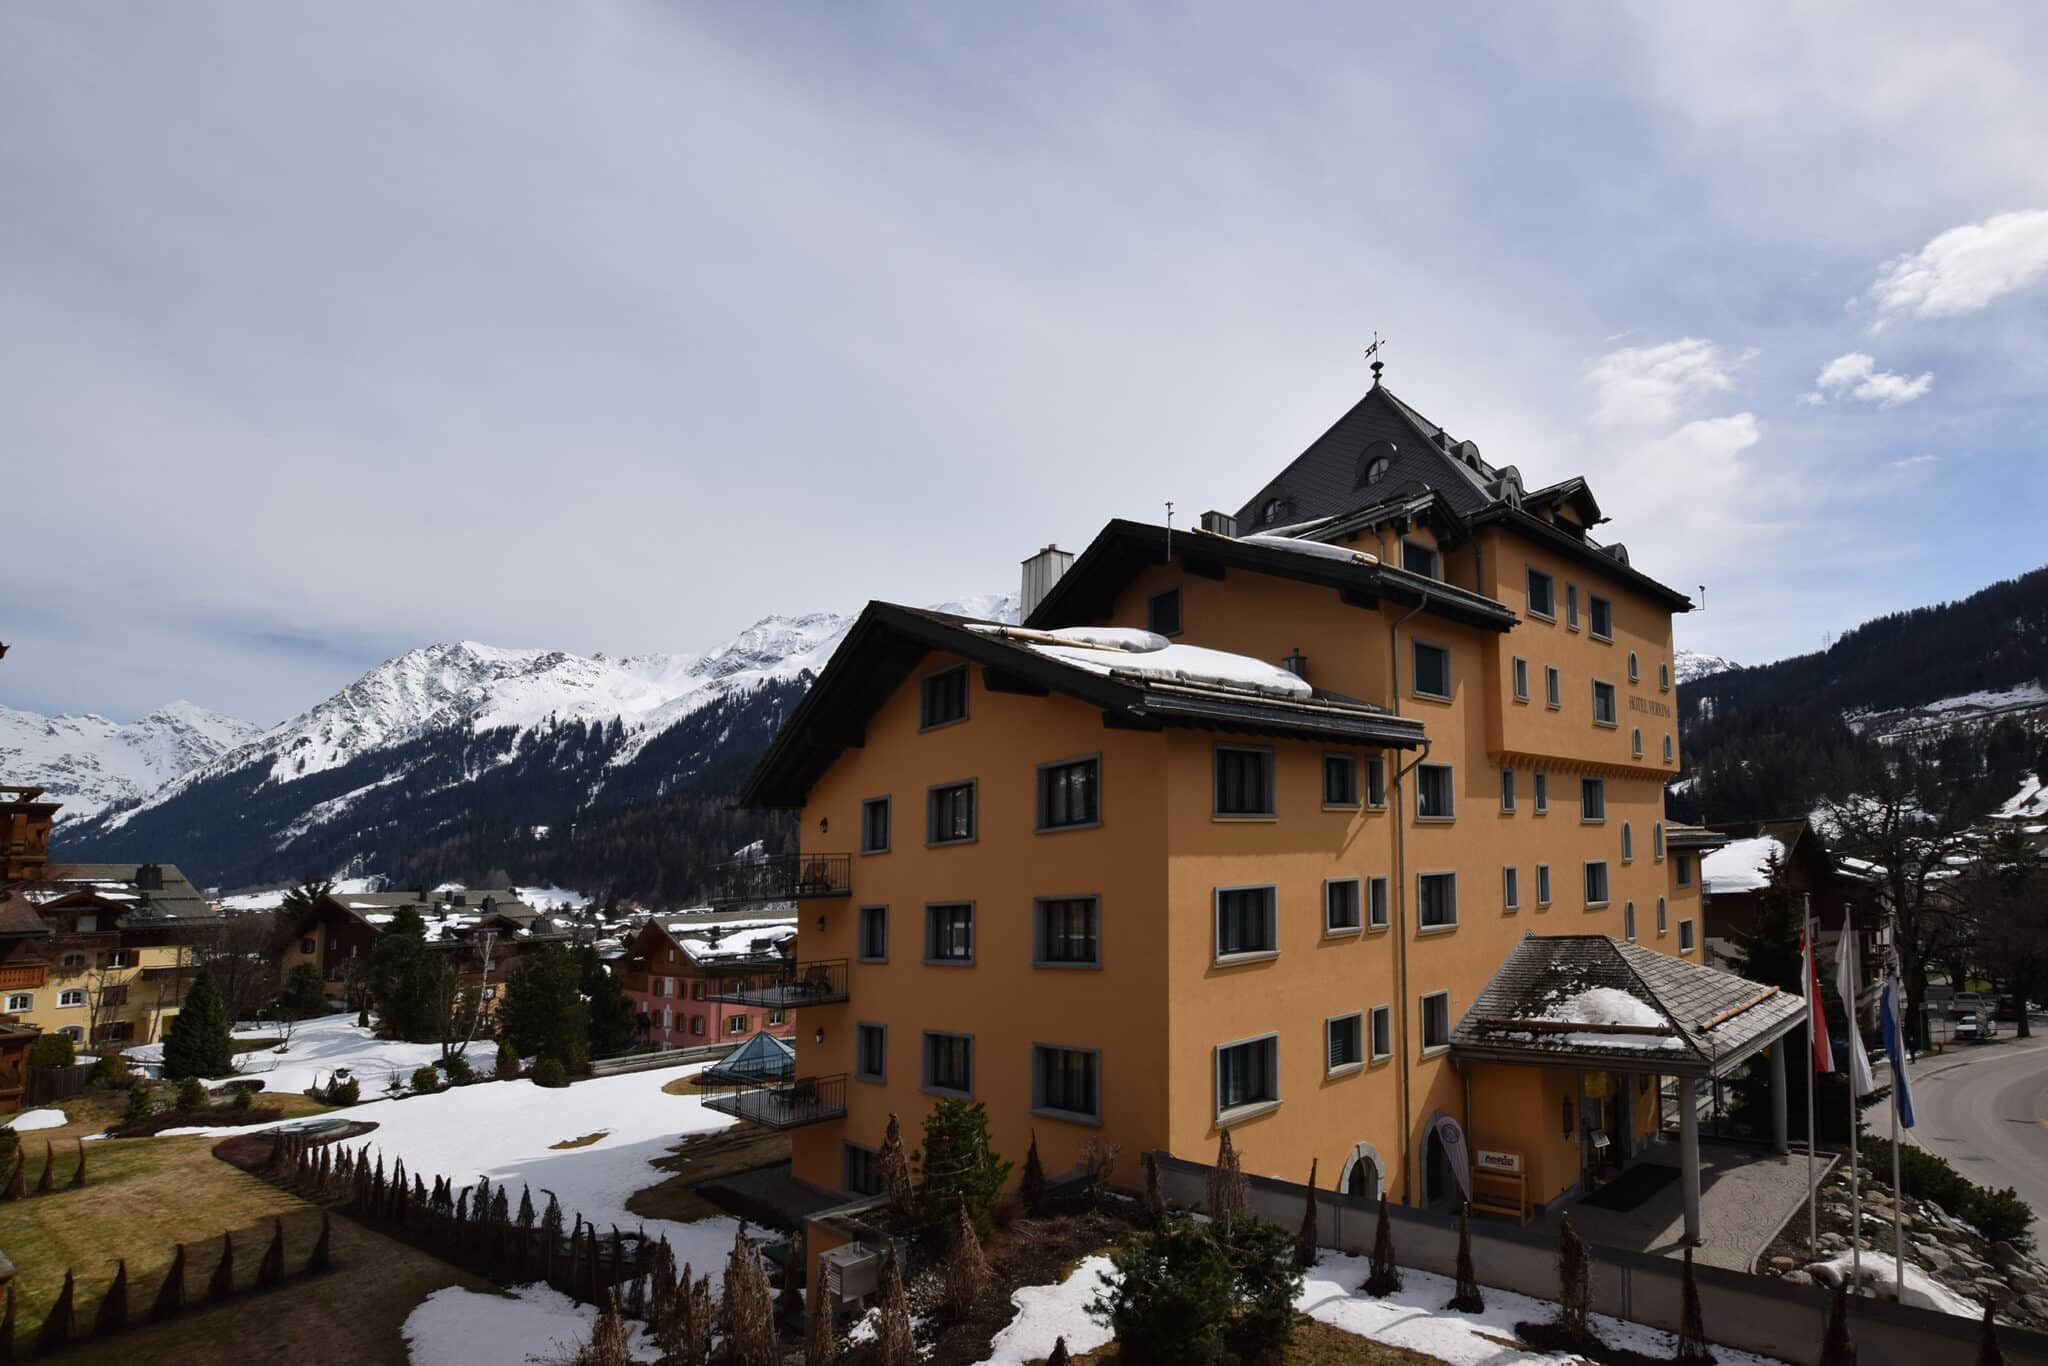 Holiday rental flats in Klosters